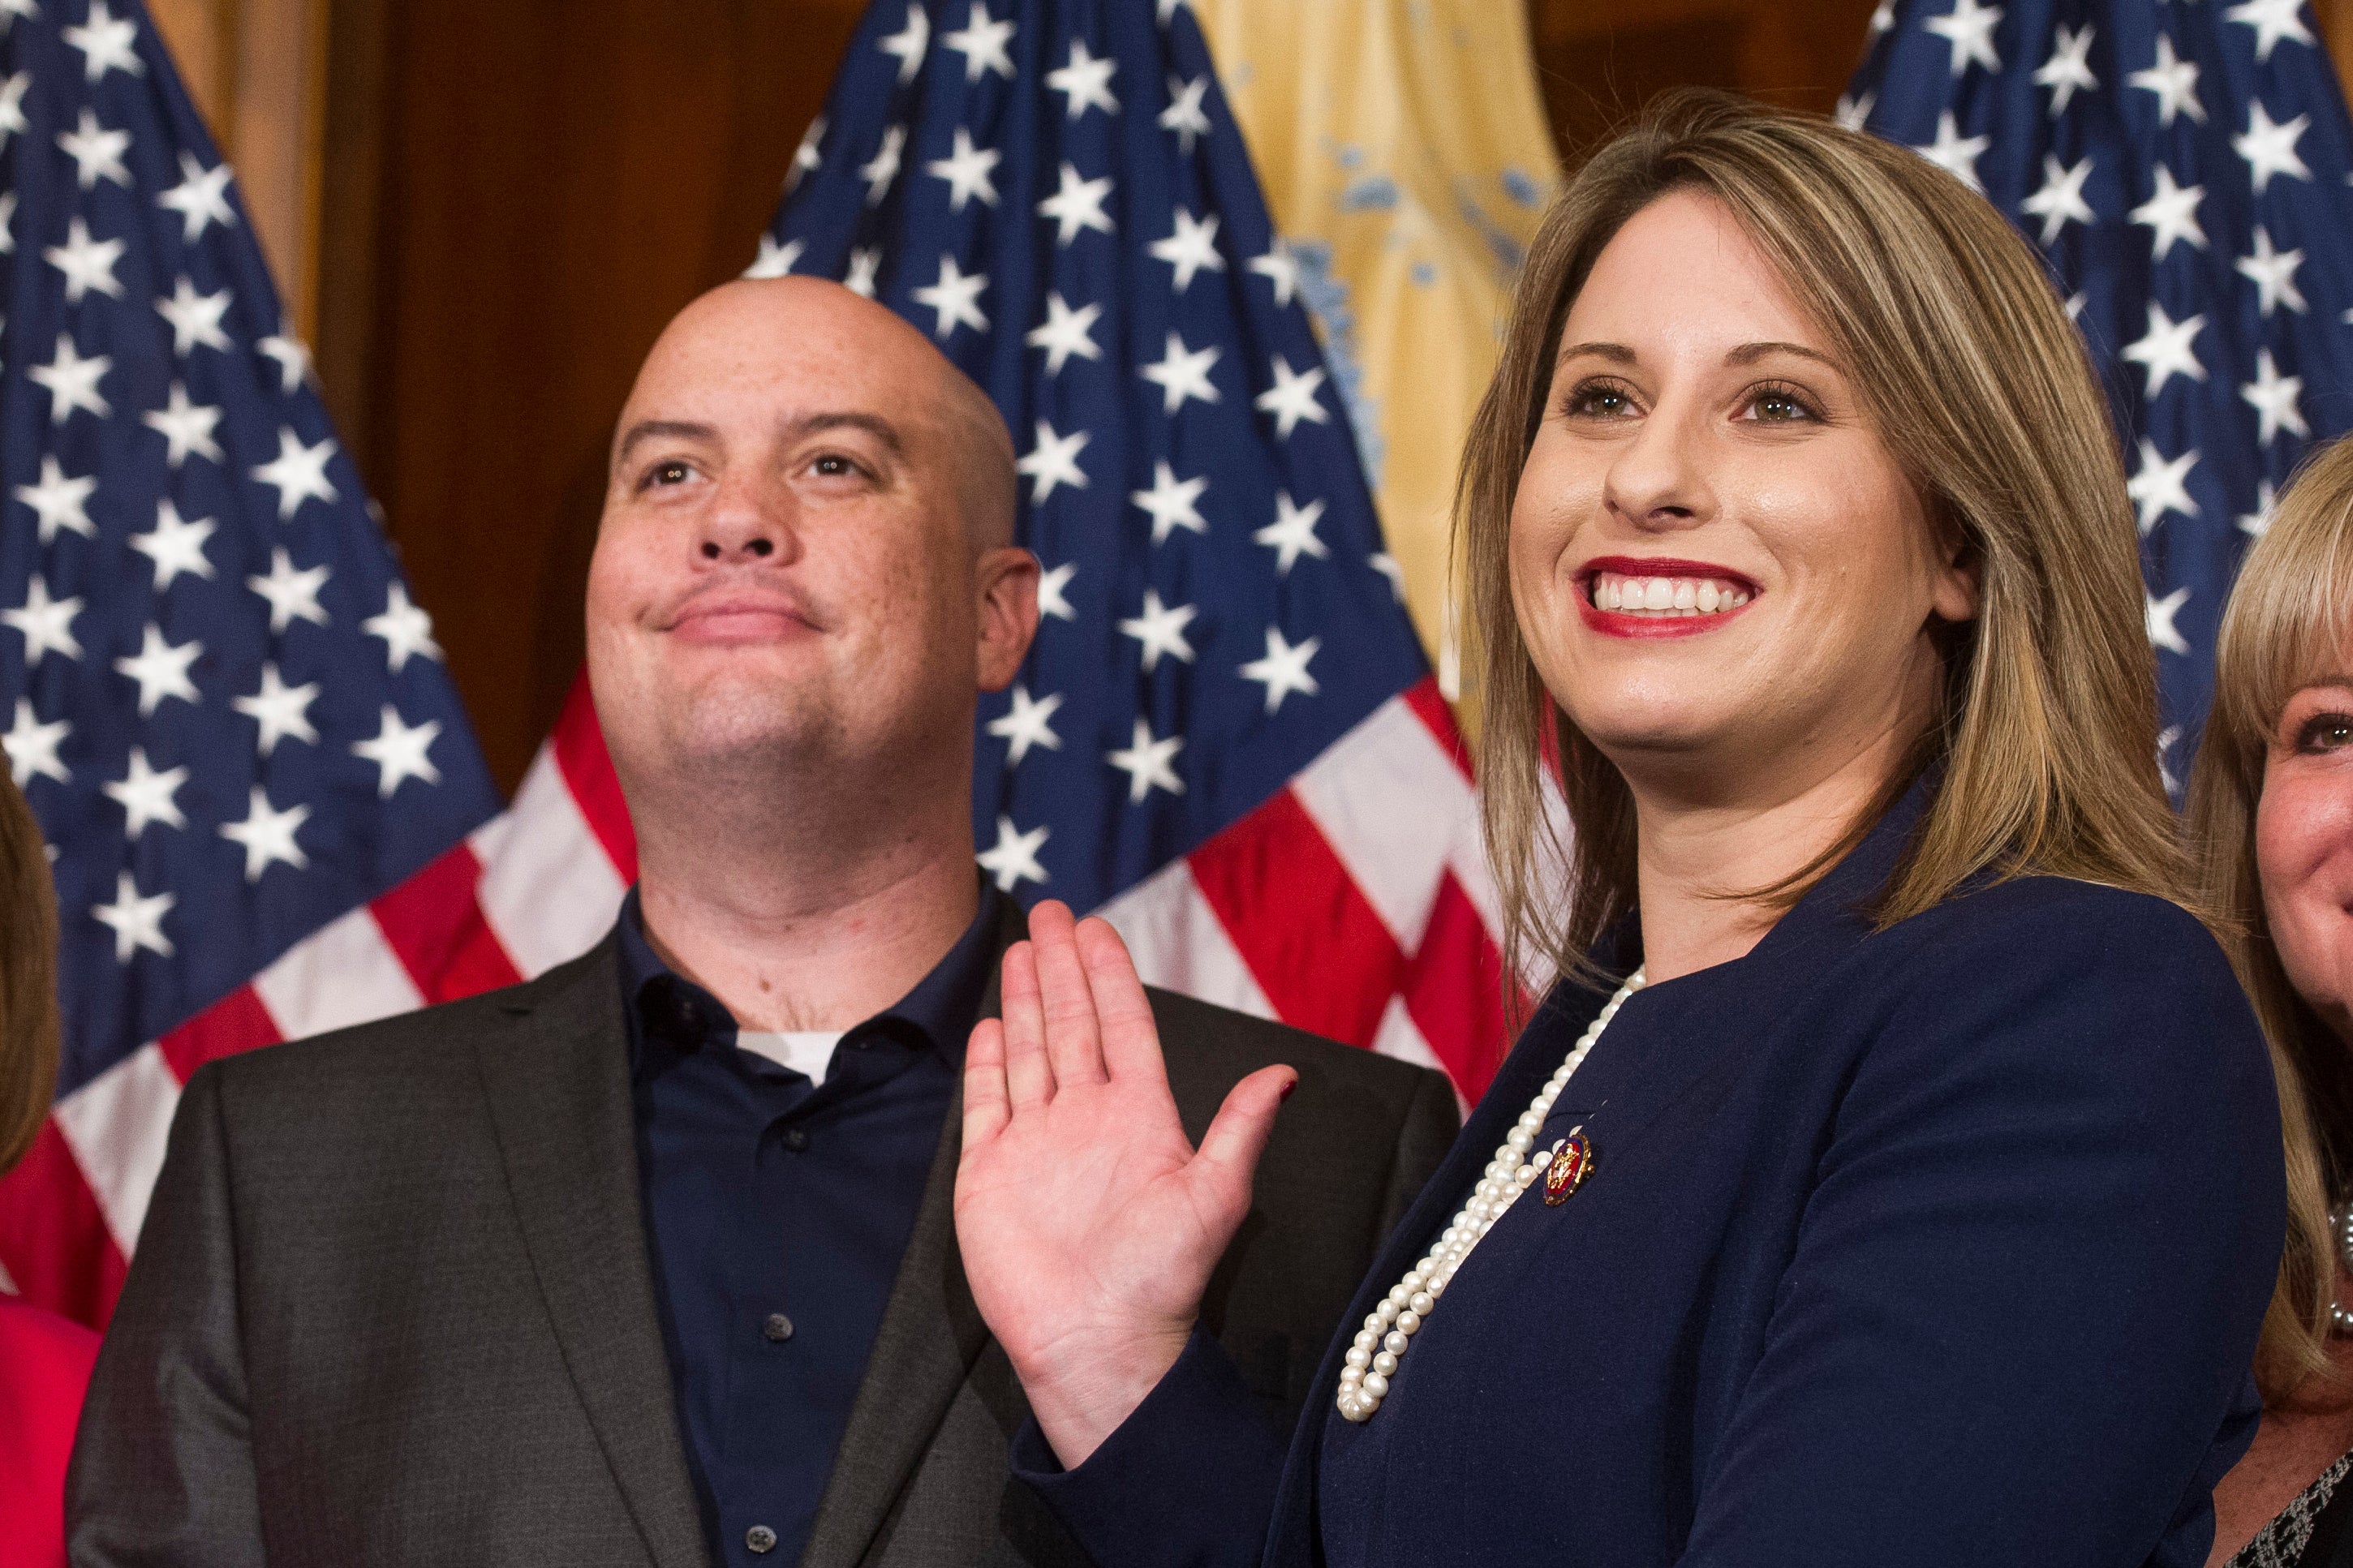 Rep. Katie Hill, D-Calif., and Hill's ex-husband, Kenneth Heslep, pose during a ceremonial swearing in on Capitol Hill in Washington during the opening session of the 116th Congress.